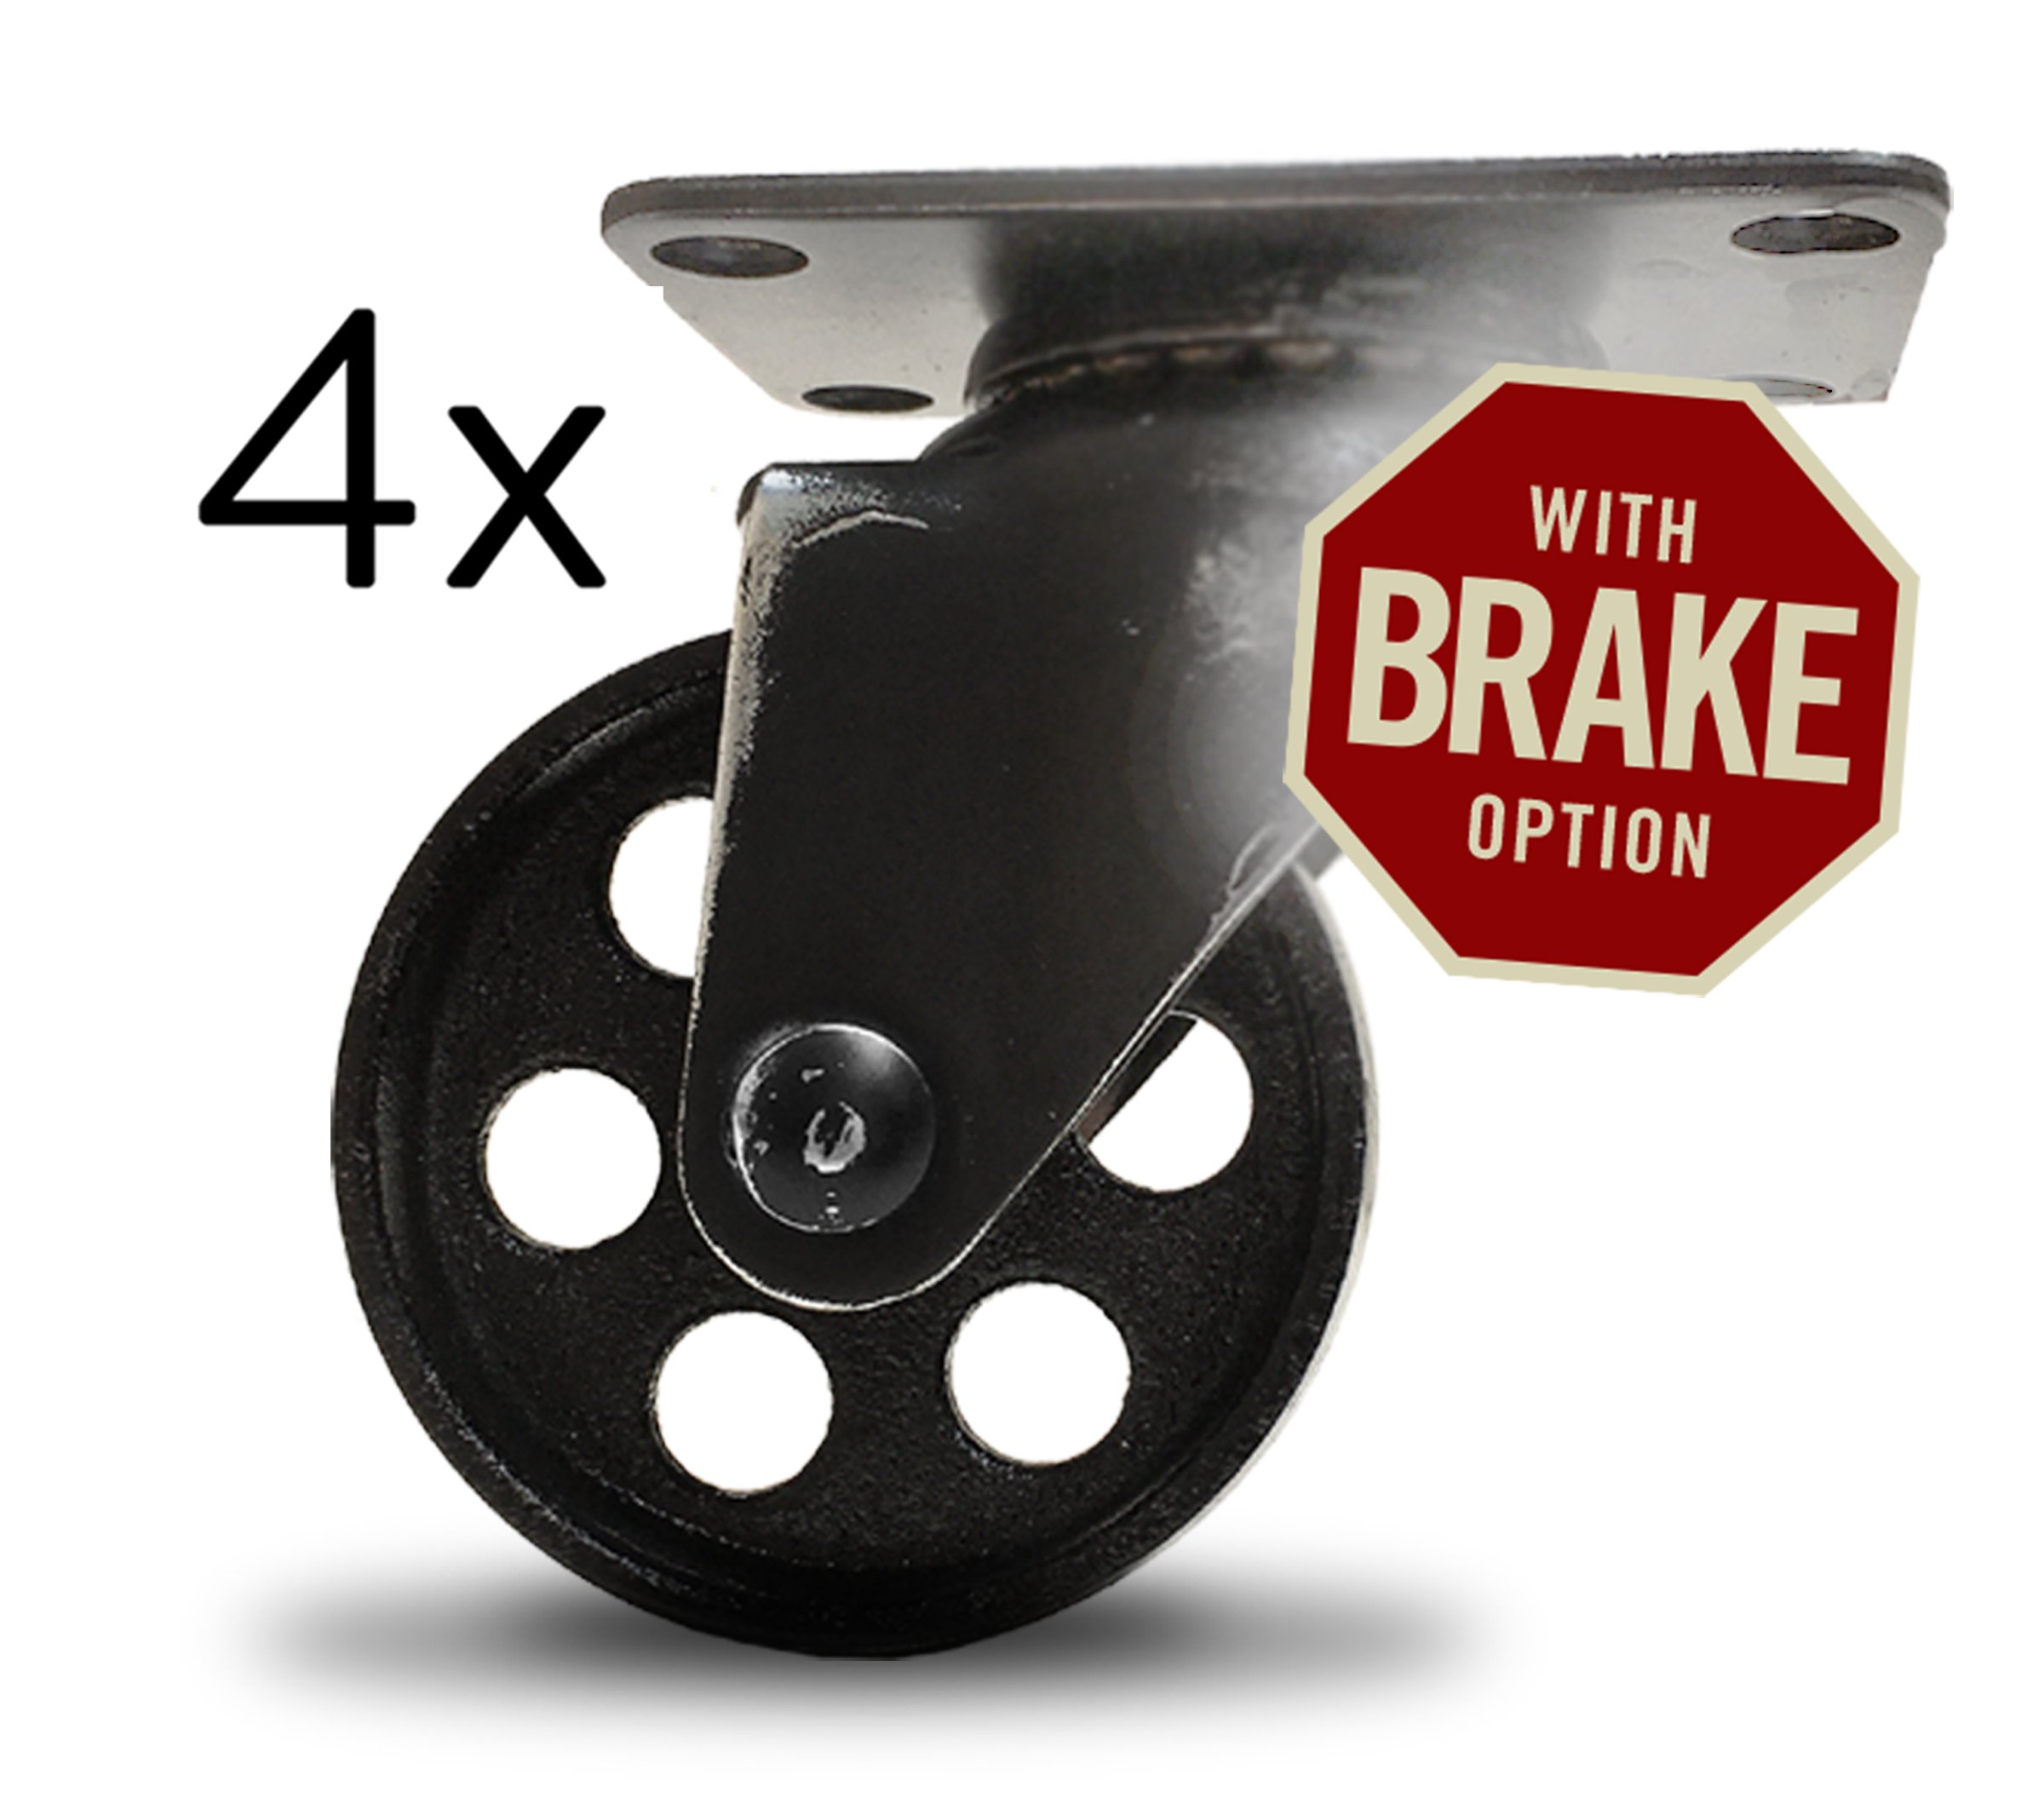 Black Casters With Brakes